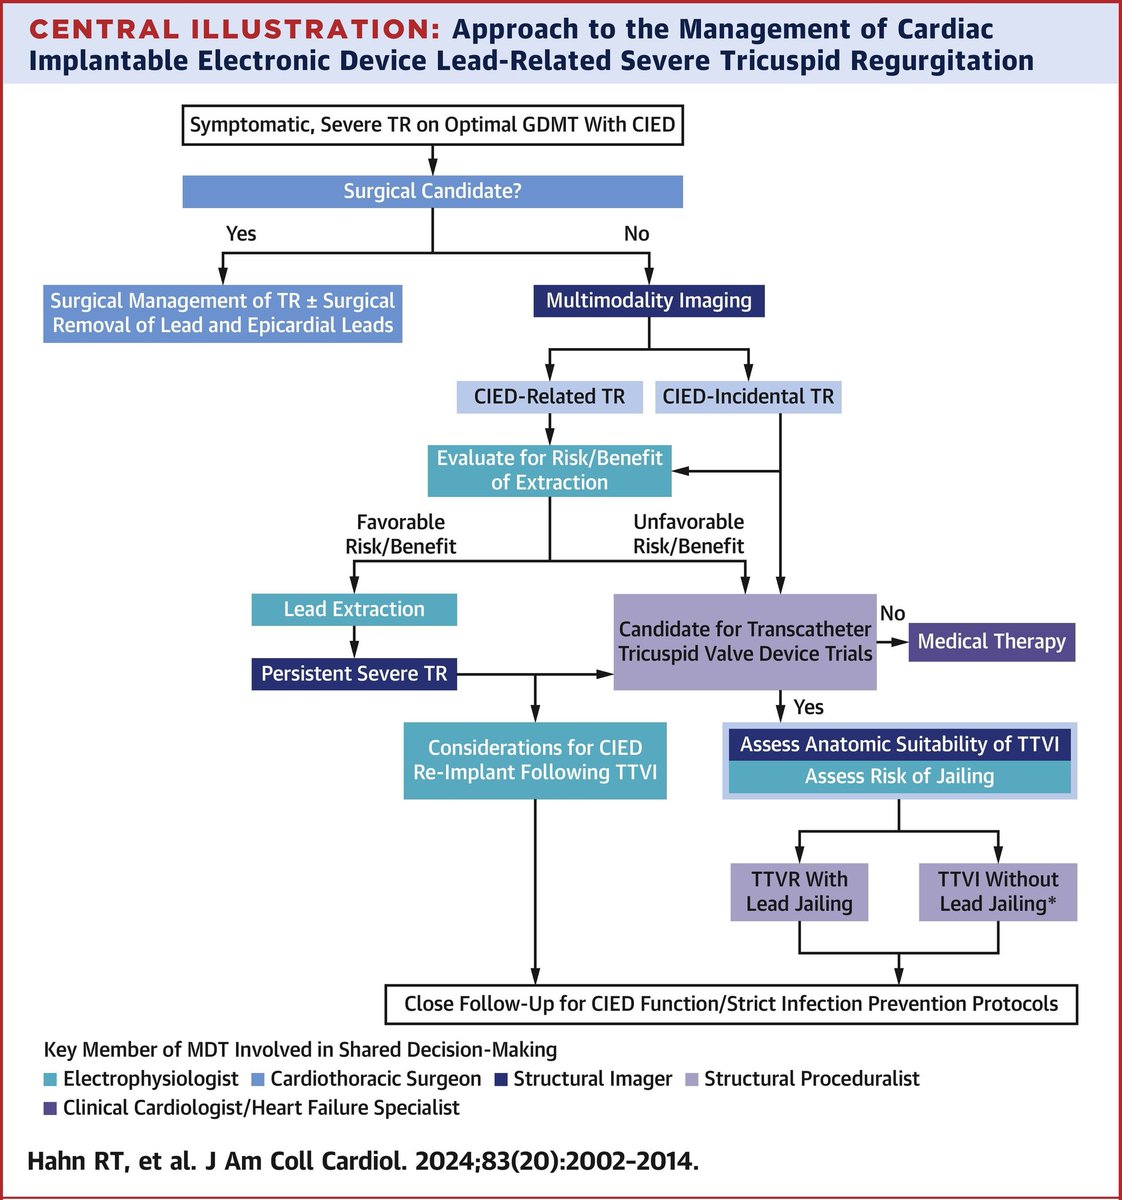 🔴Managing Implanted Cardiac Electronic Devices in Patients With Severe Tricuspid Regurgitation: JACC State-of-the-Art Review #openaccess #2024Review 

jacc.org/doi/10.1016/j.…
 #Cardiology #Cardioed #meded #medtwitterWhat #MedTwitter #CardioEd #medx #medEd #CardioTwitter